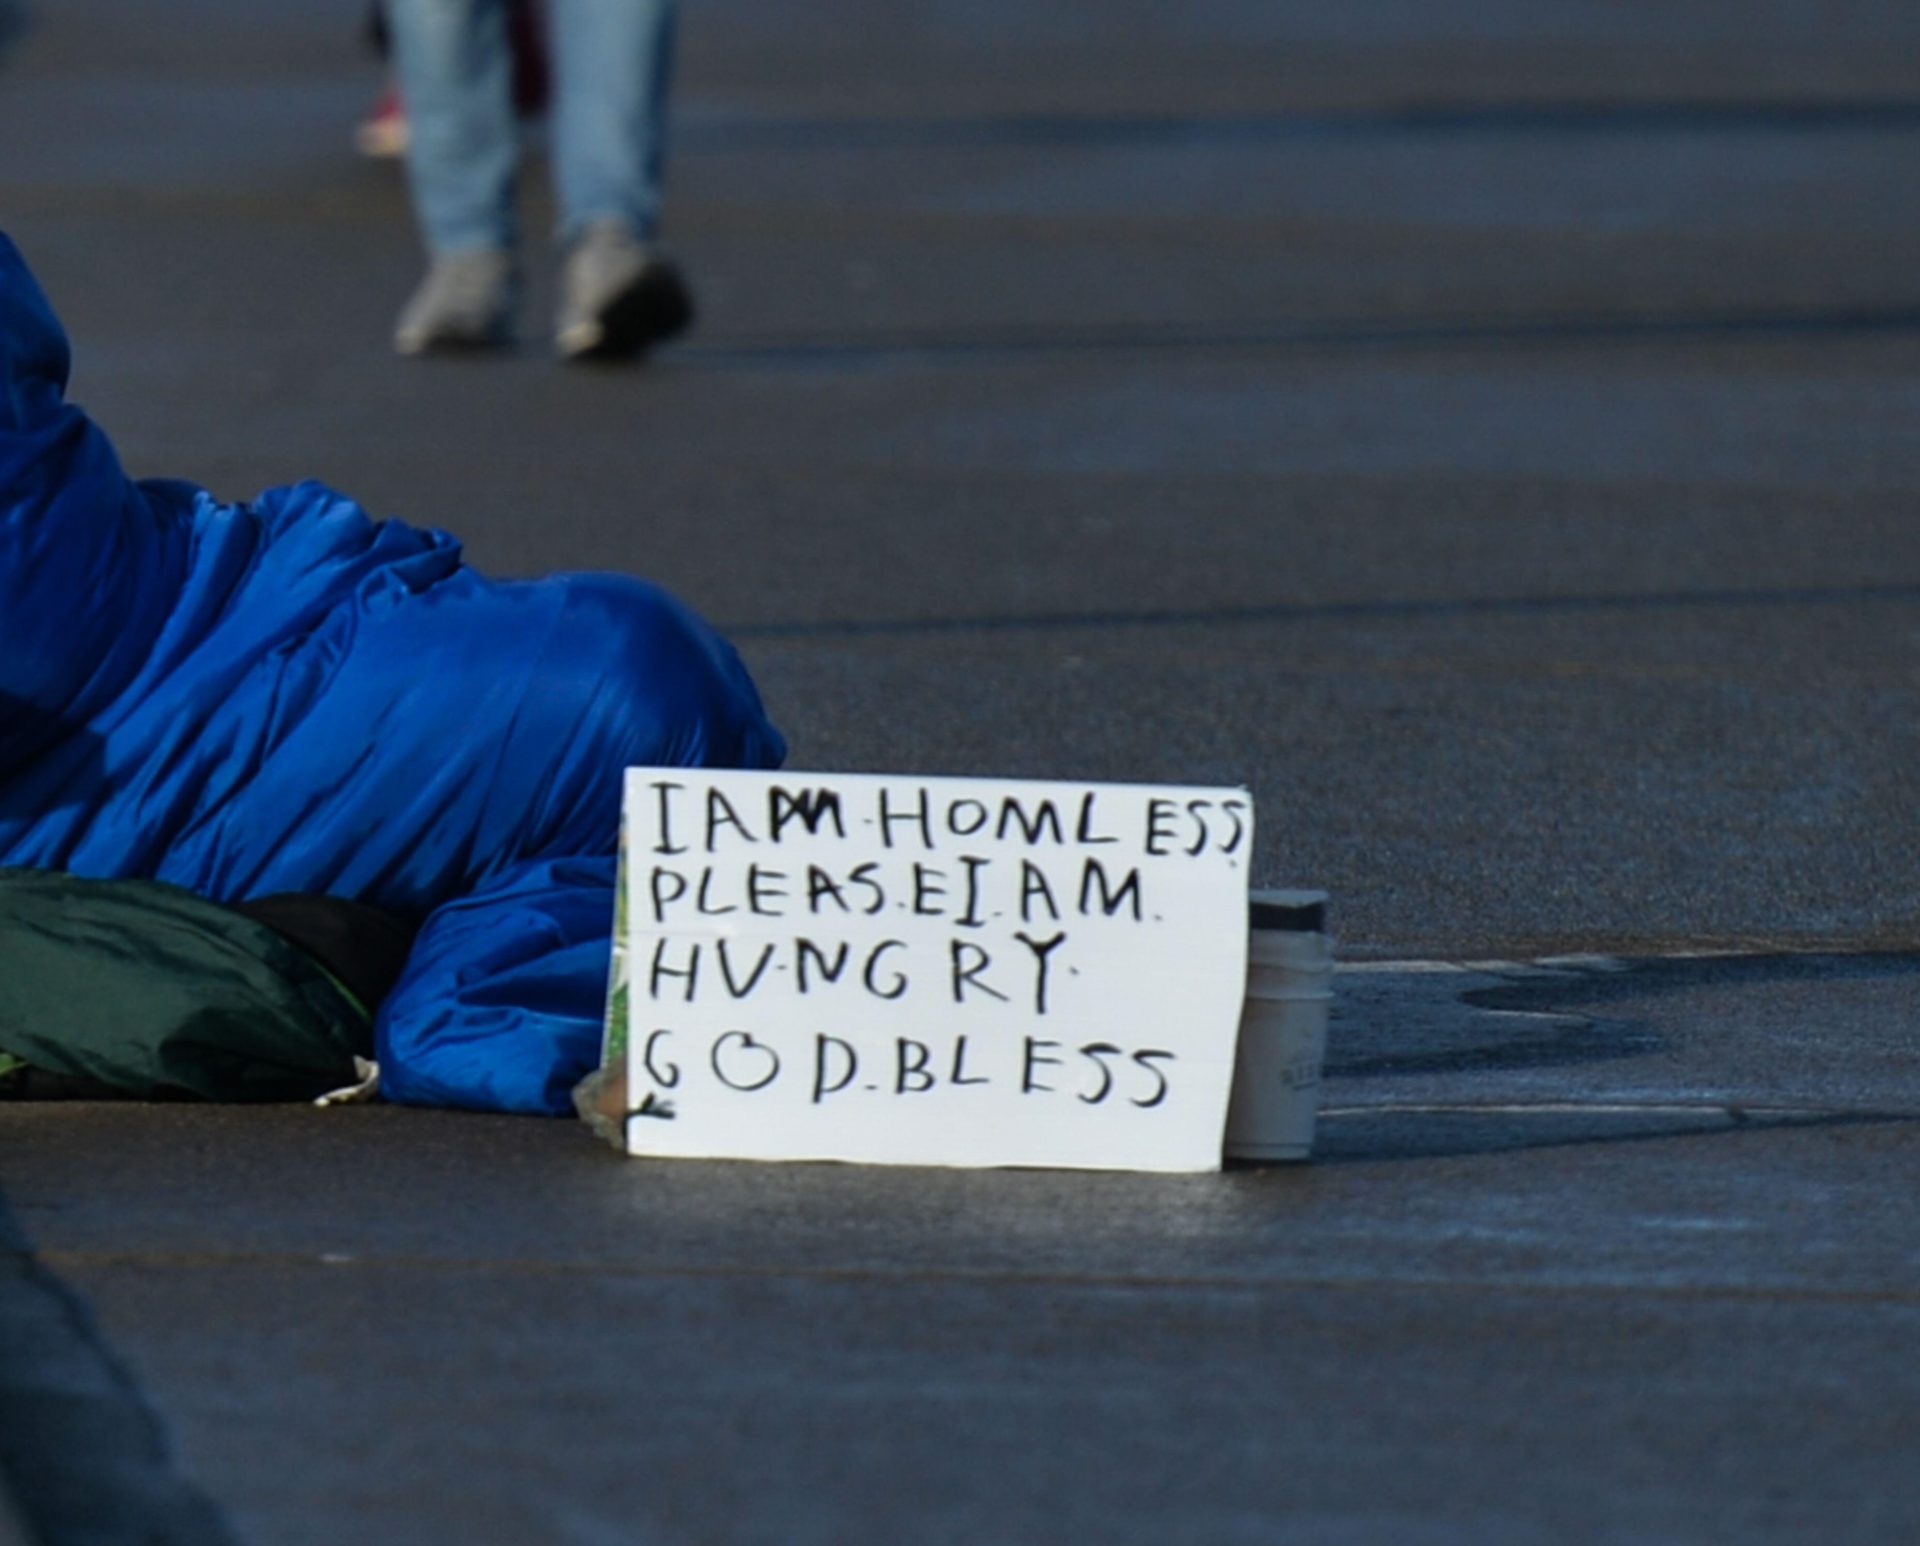 A homeless person begging on a street in Dun Laoghaire, Co Dublin in January 2021